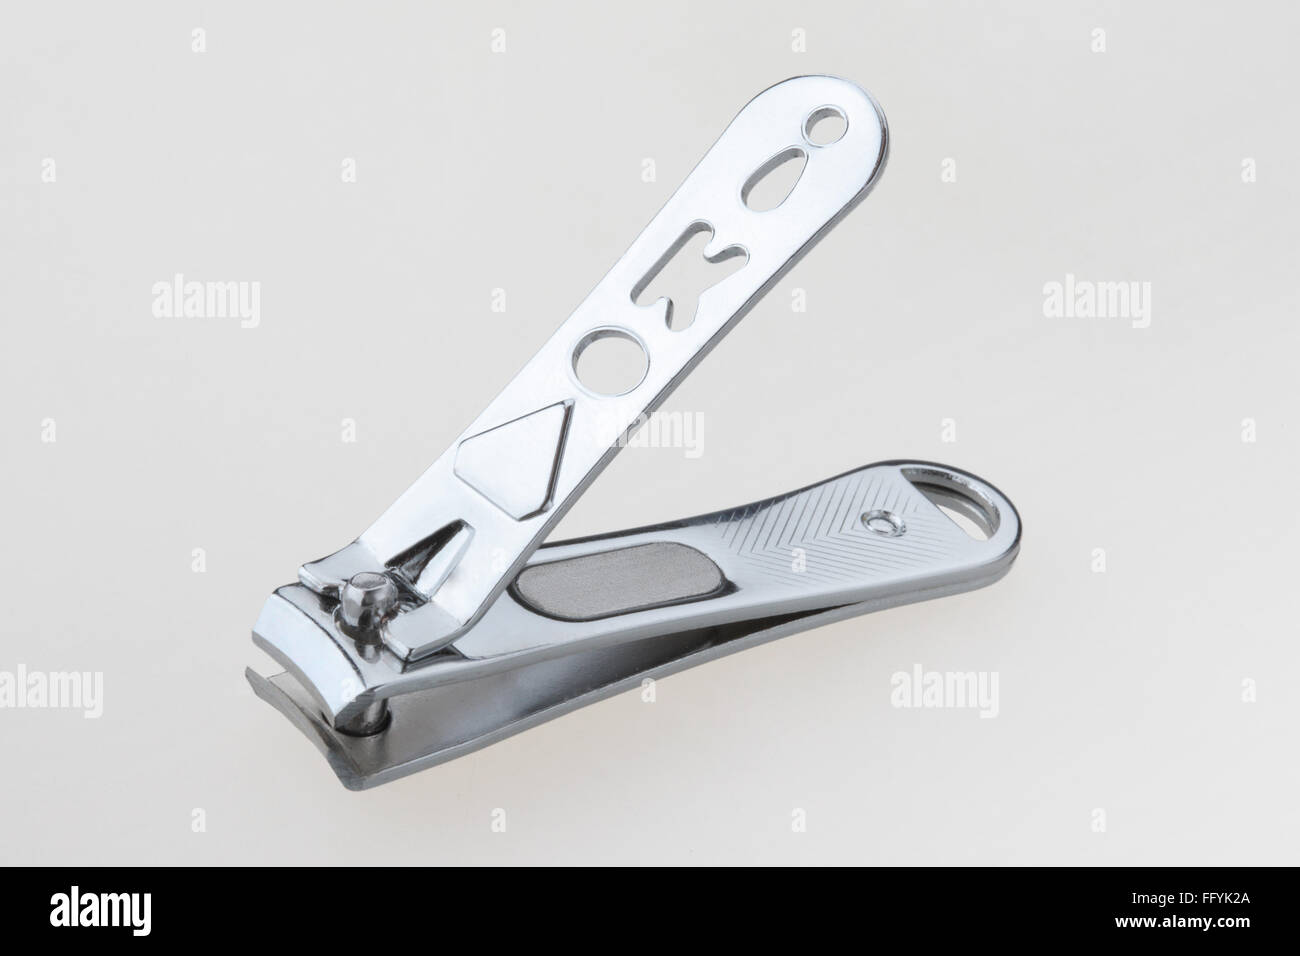 Pet Life Clip N File 2-in-1 Grooming Pet Nail Clipper with Built-in  Concealed Filer, 1 Pack - Kroger